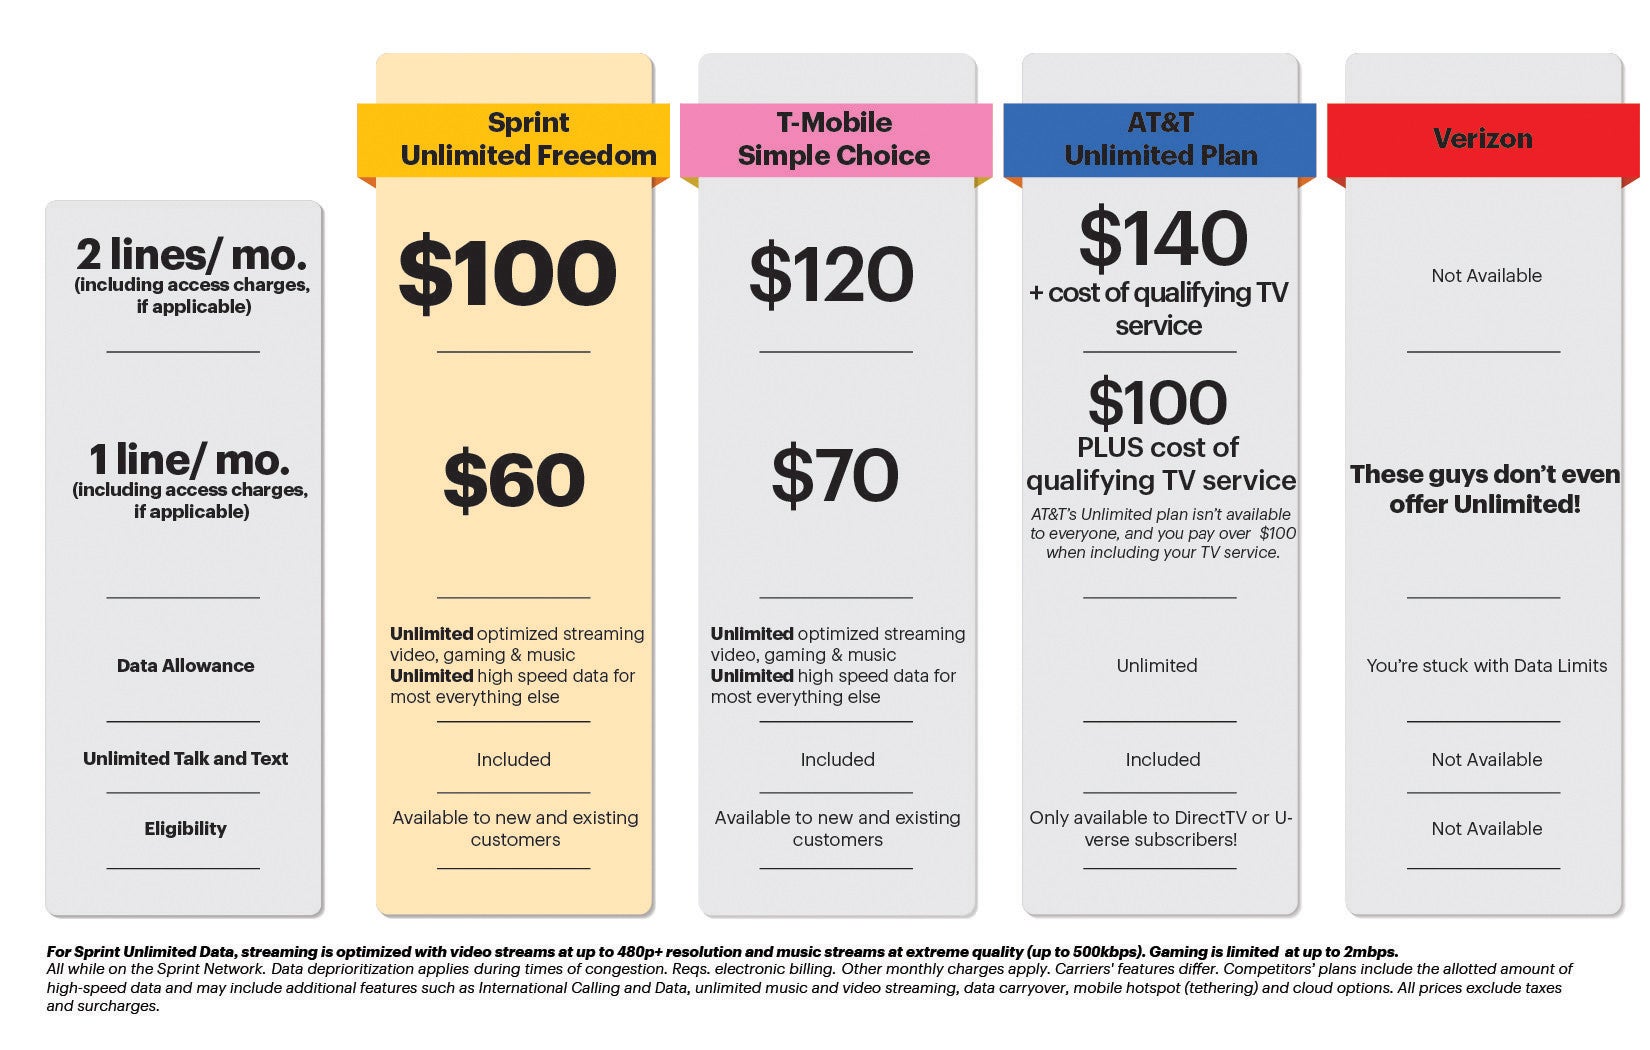 Sprint's Unlimited Freedom aims to take on T-Mobile One